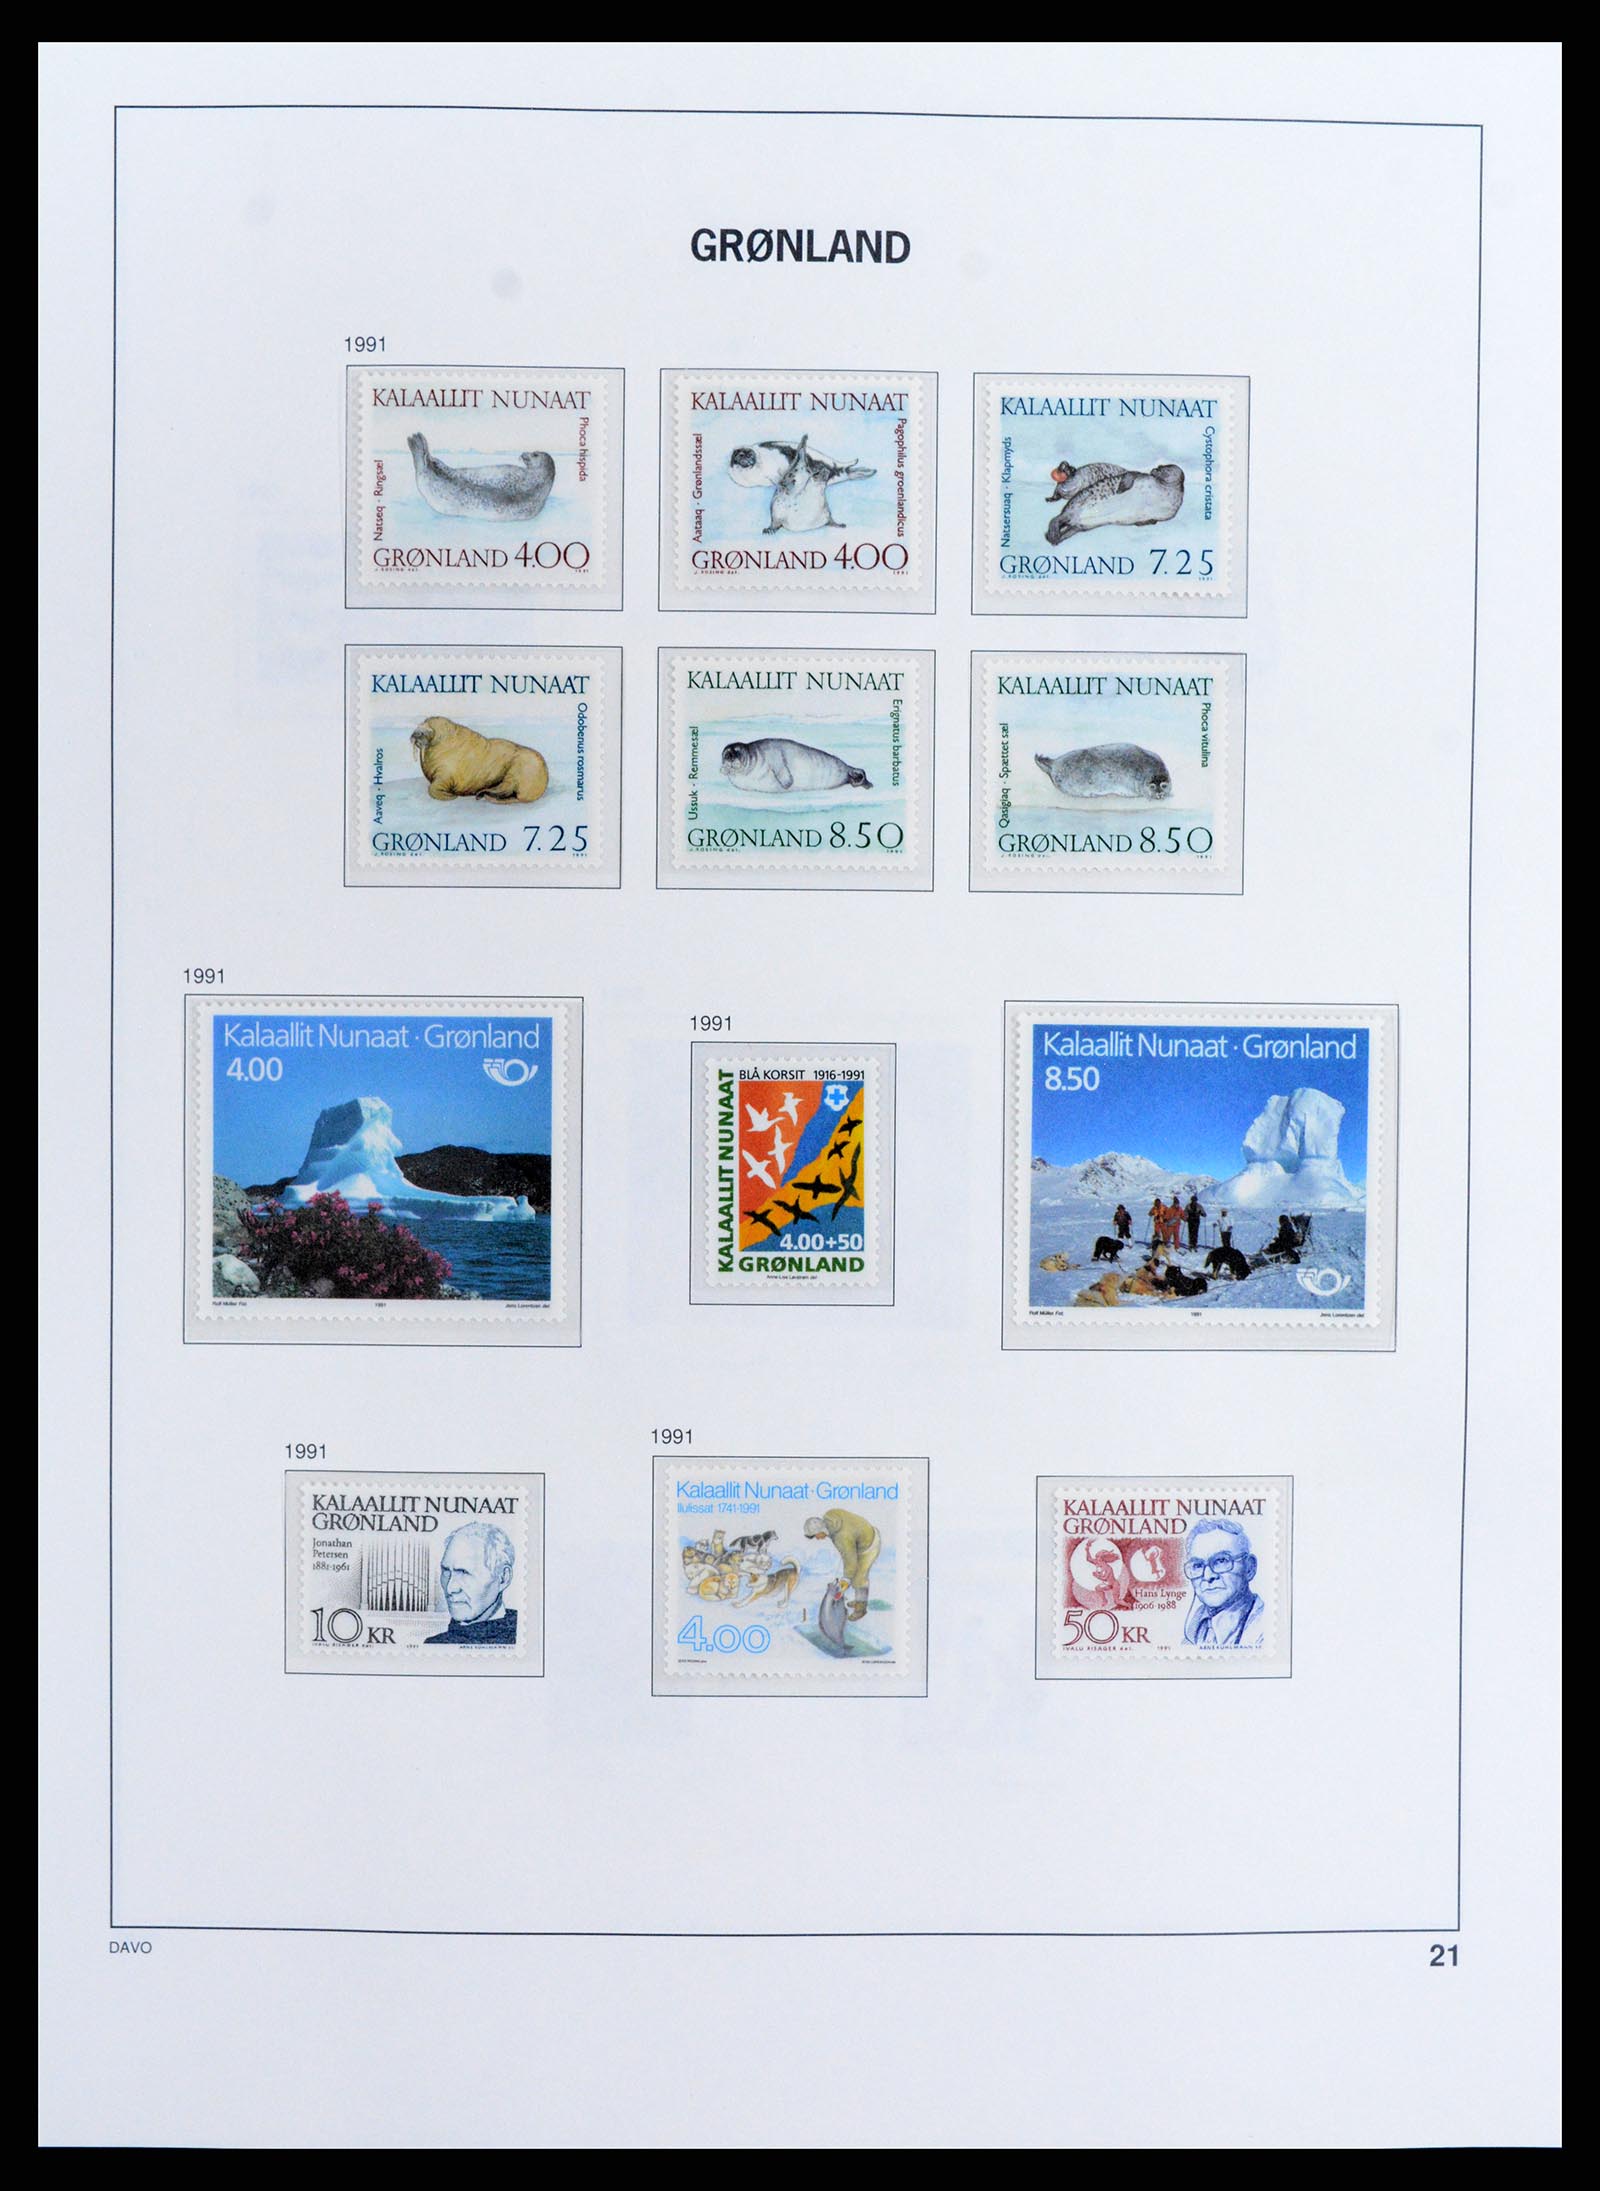 37802 023 - Stamp Collection 37802 Greenland 1905-2019!